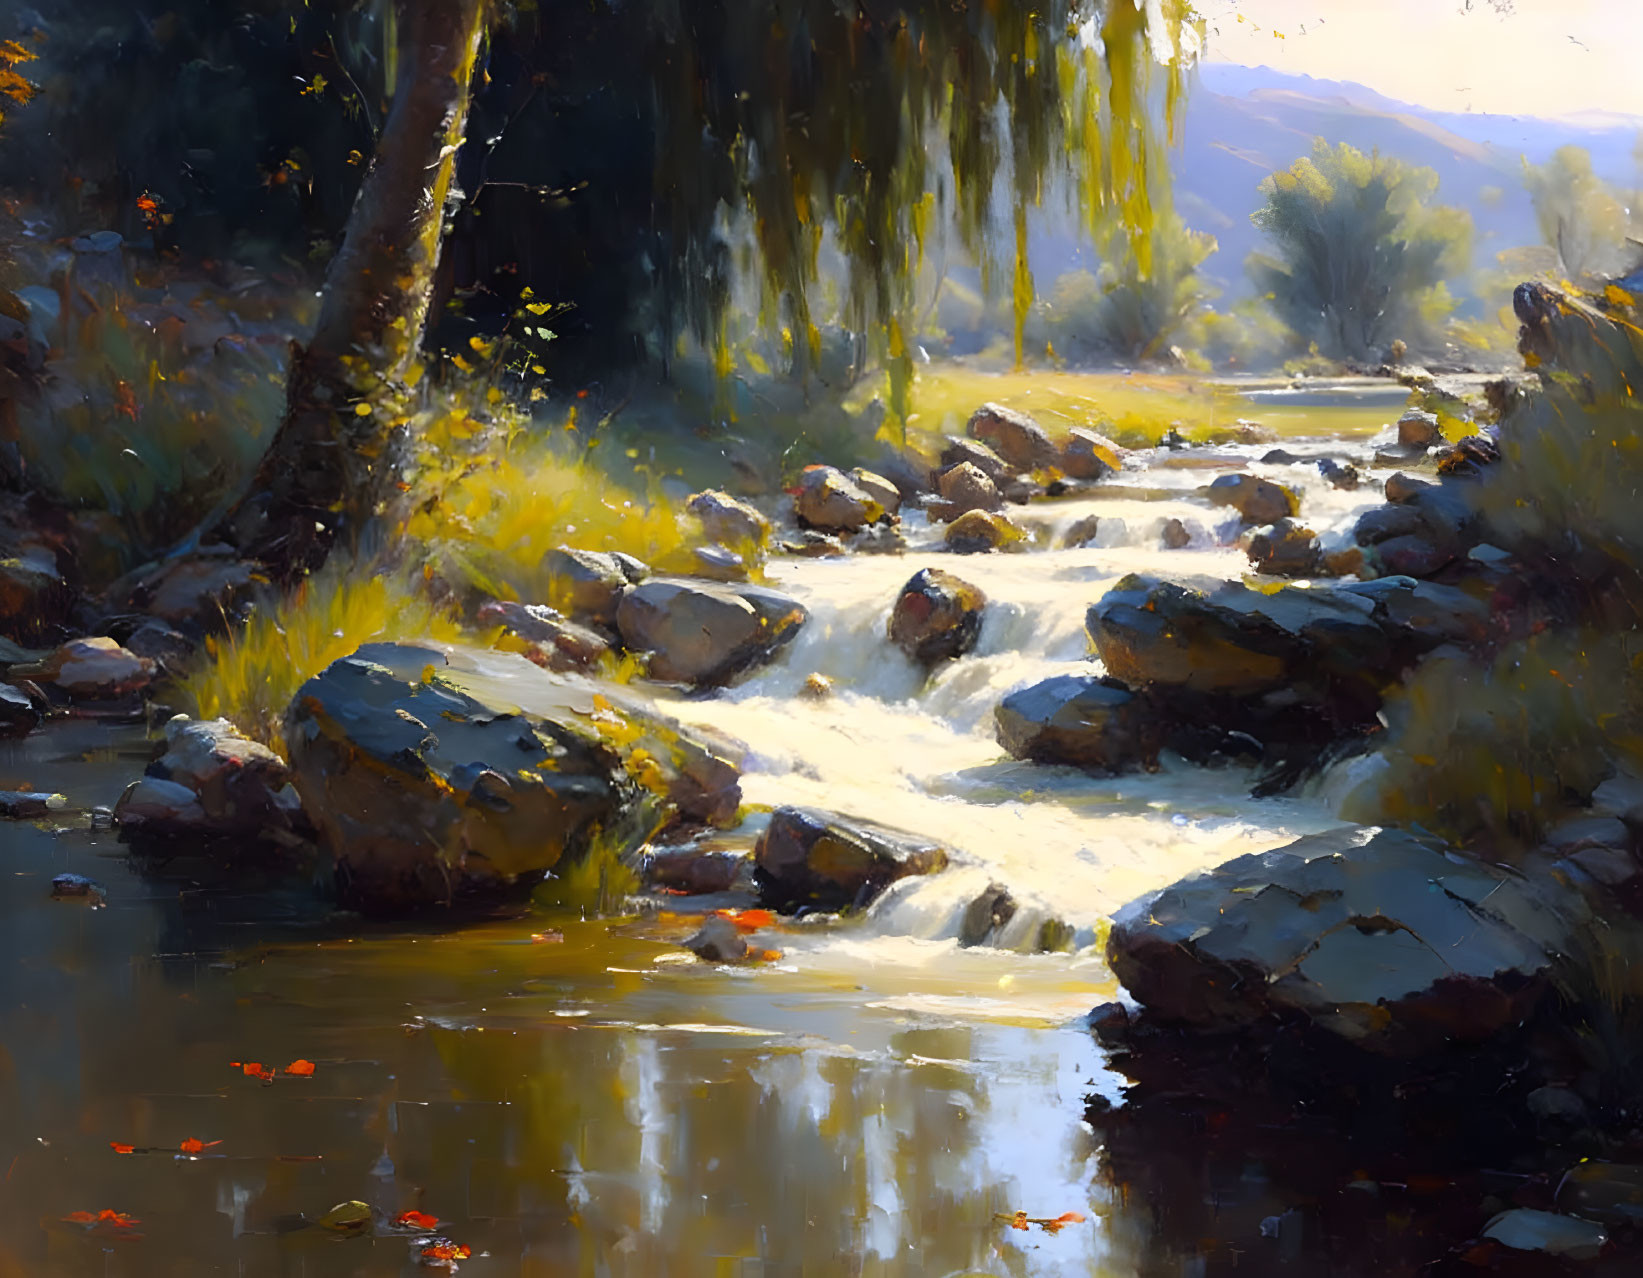 Tranquil landscape: sunlit stream, rocky bed, trees, hazy mountains